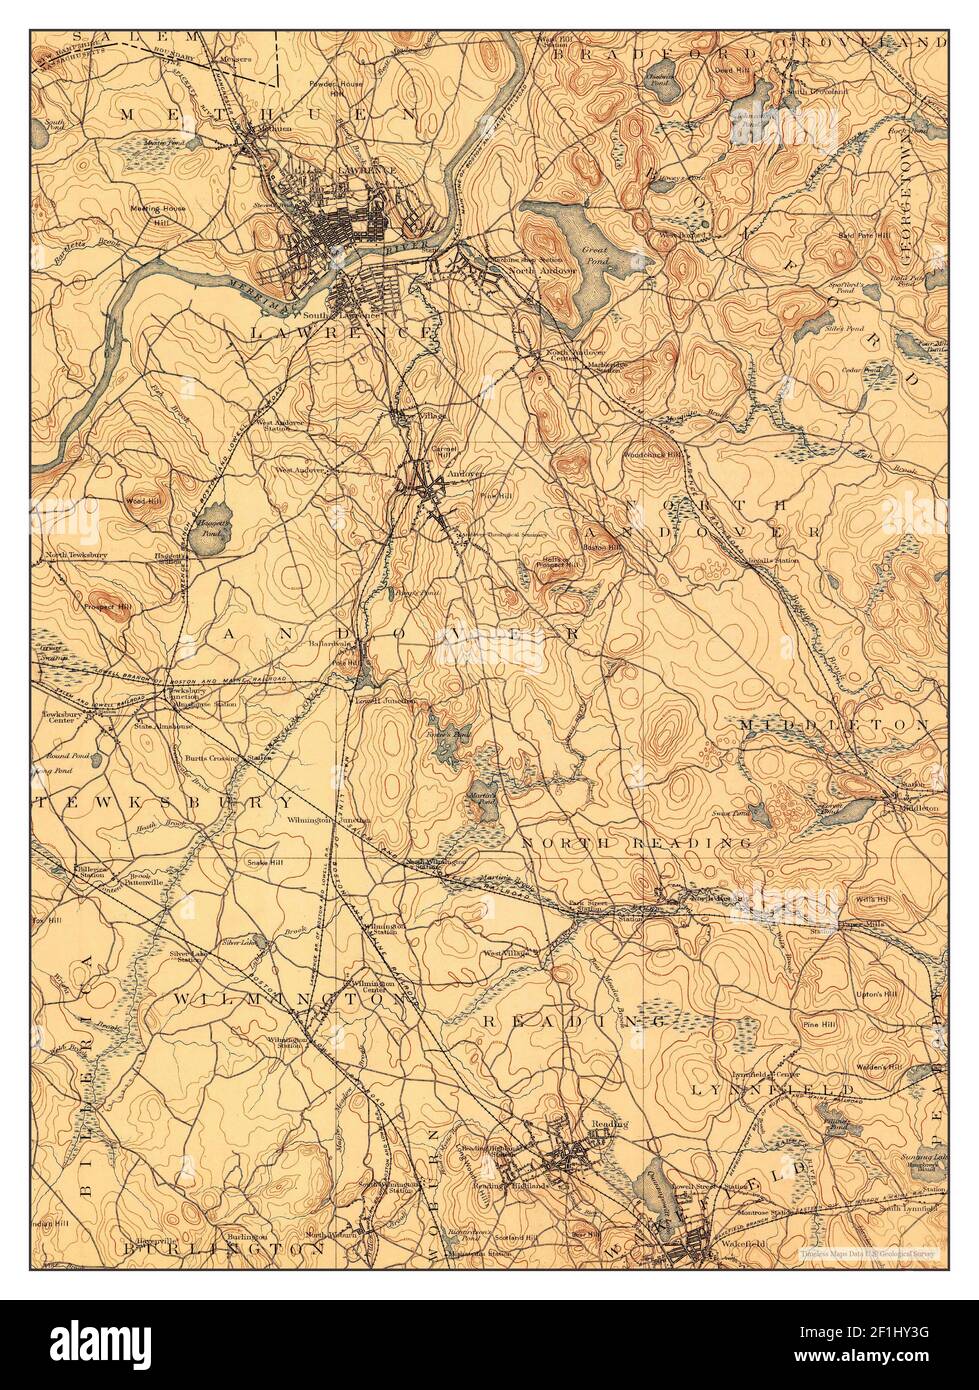 Lawrence, Massachusetts, map 1893, 1:62500, United States of America by Timeless Maps, data U.S. Geological Survey Stock Photo